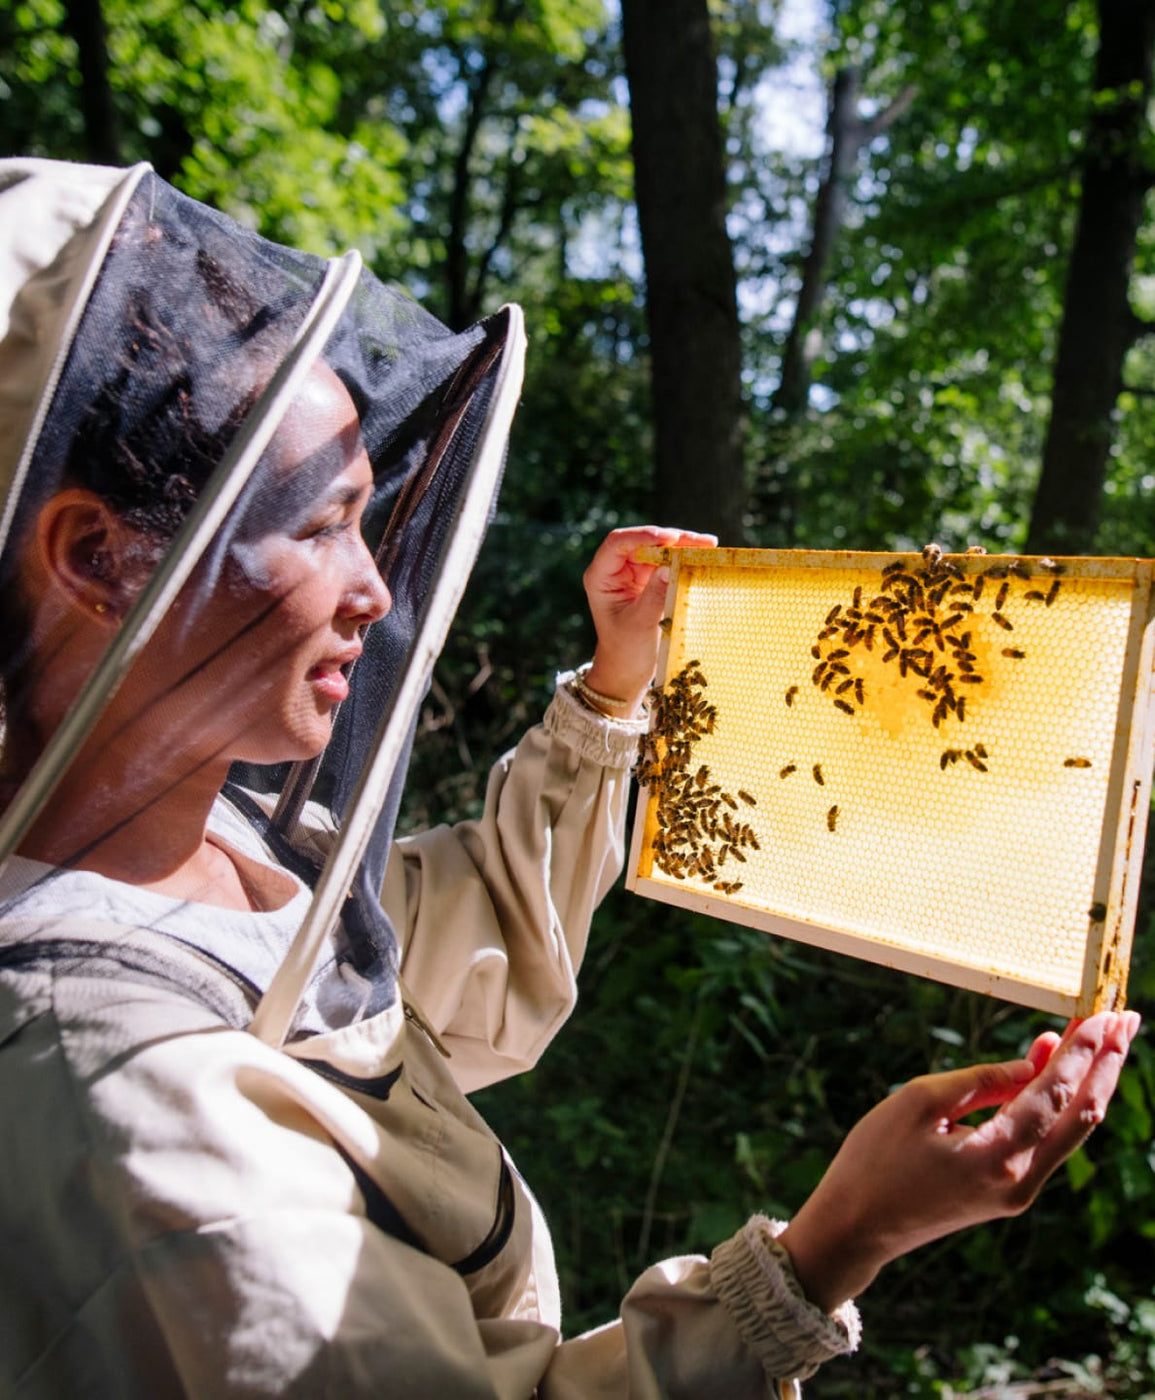 A girl dressed up in beekeeping clothing holding a honeycomb frame with honeybees on it